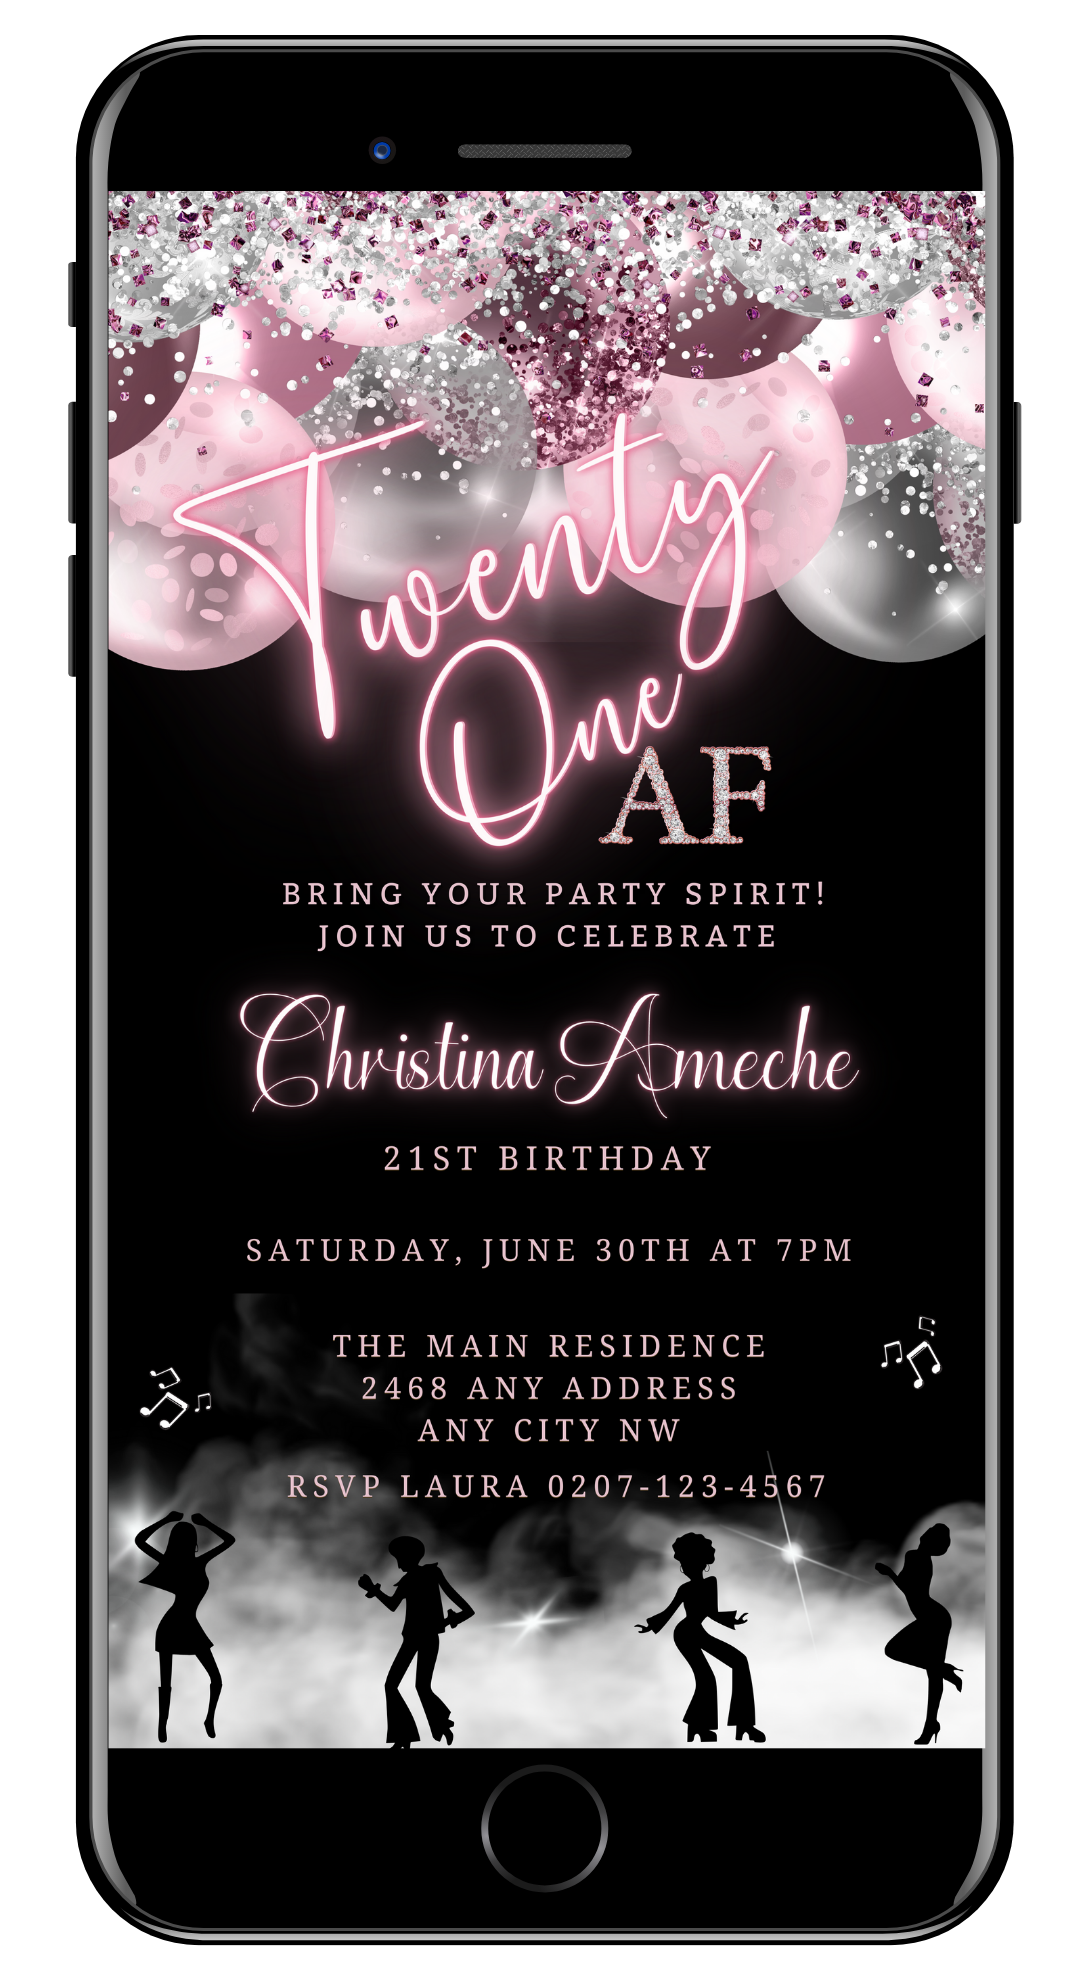 Customizable Digital Mauve Pink Silver Neon | 21AF Birthday Evite displayed on a smartphone screen with pink and silver balloons, for easy personalization via Canva.